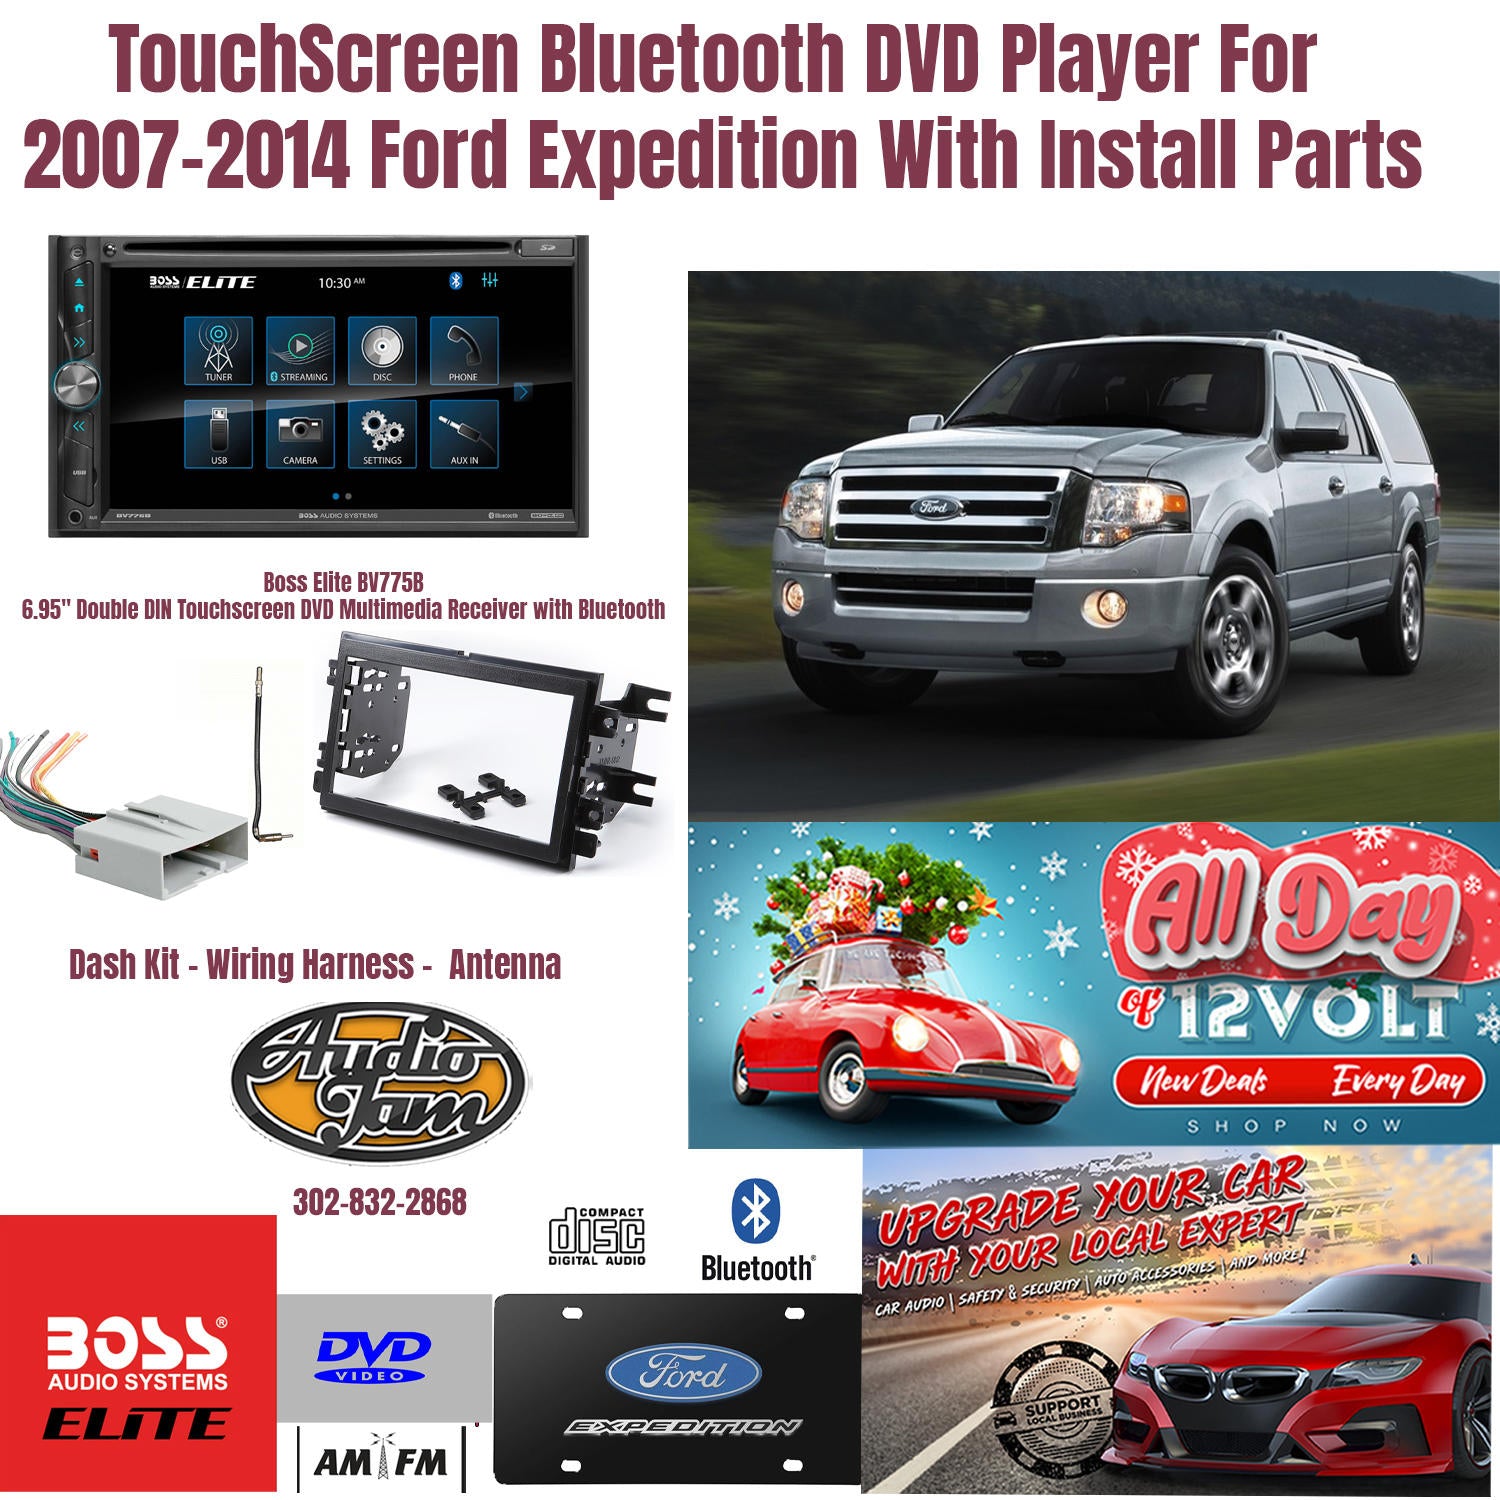 TouchScreen Bluetooth DVD Player For 2007-14 Ford Expedition With Install Parts